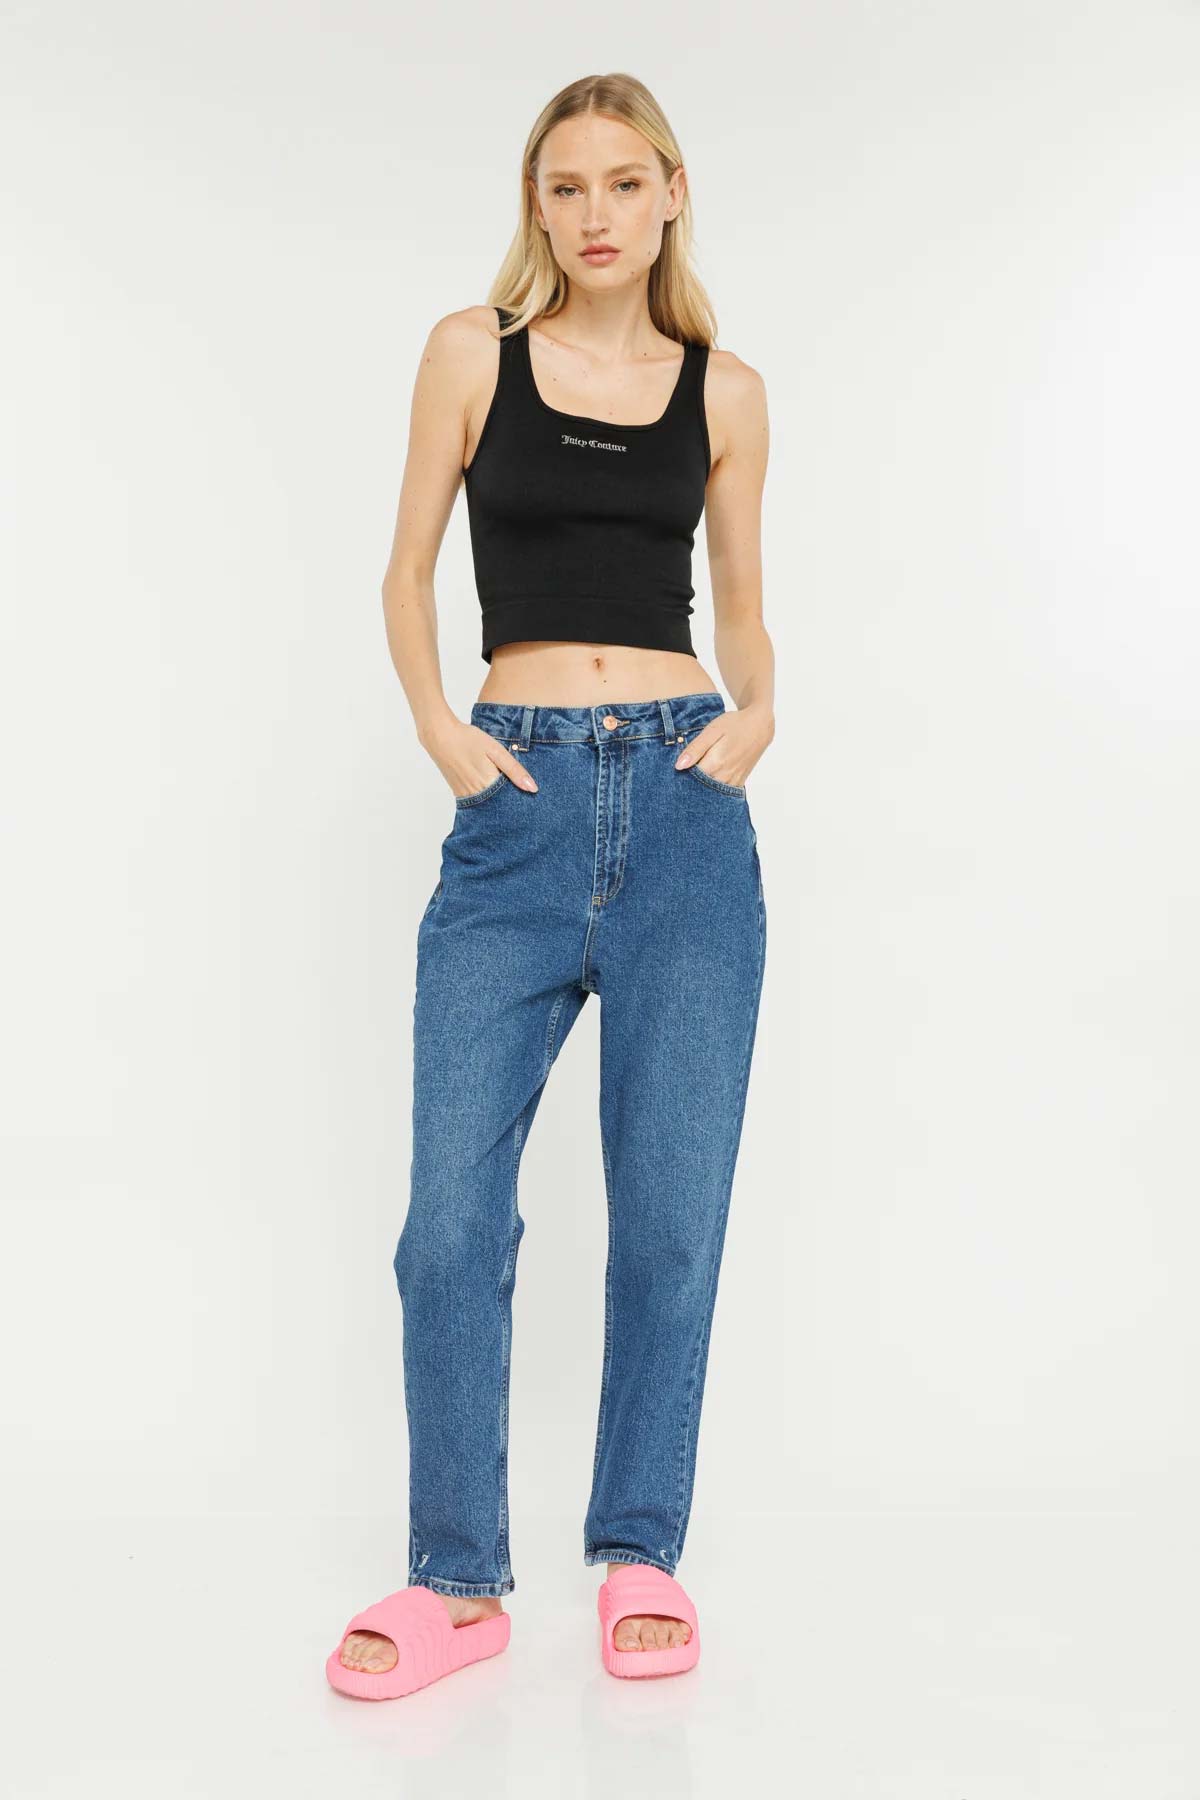 Juicy Couture ג'ינס Skinny בצבע כחול בהיר-Juicy Couture-34-נאקו